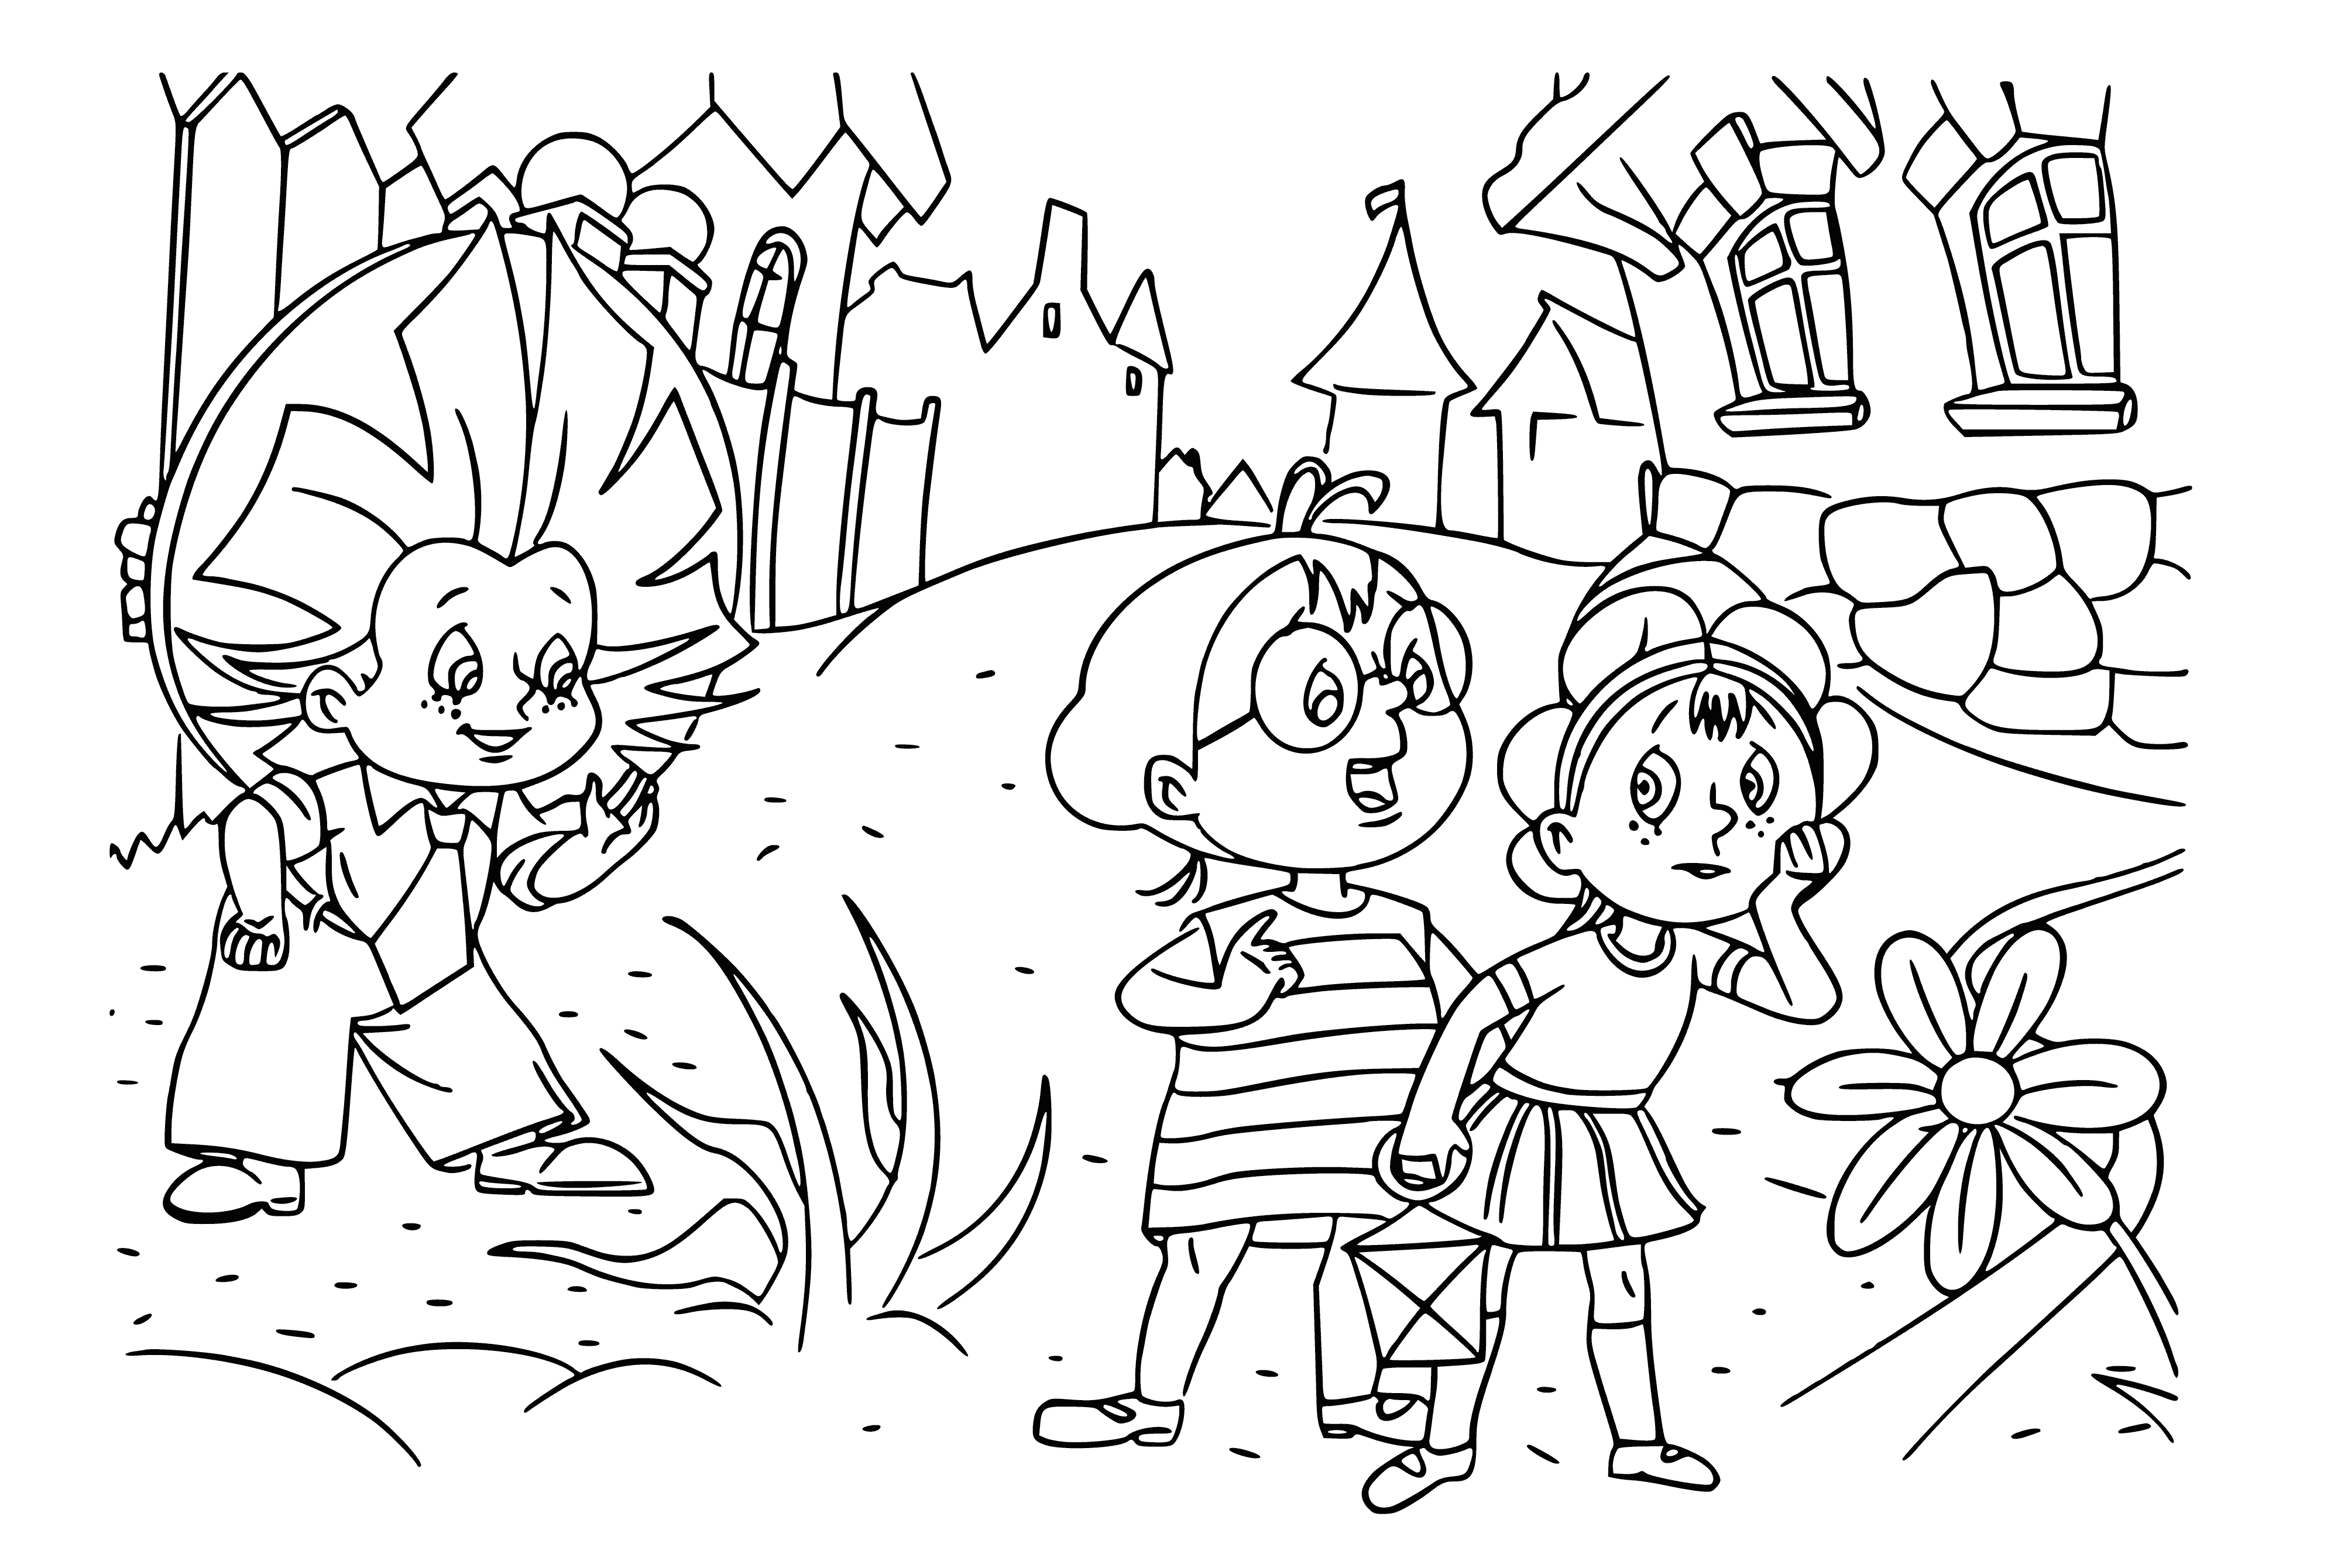 coloring page: Dunno and two girls sit/stand together under moonlight, his smile the brightest star in the sky.